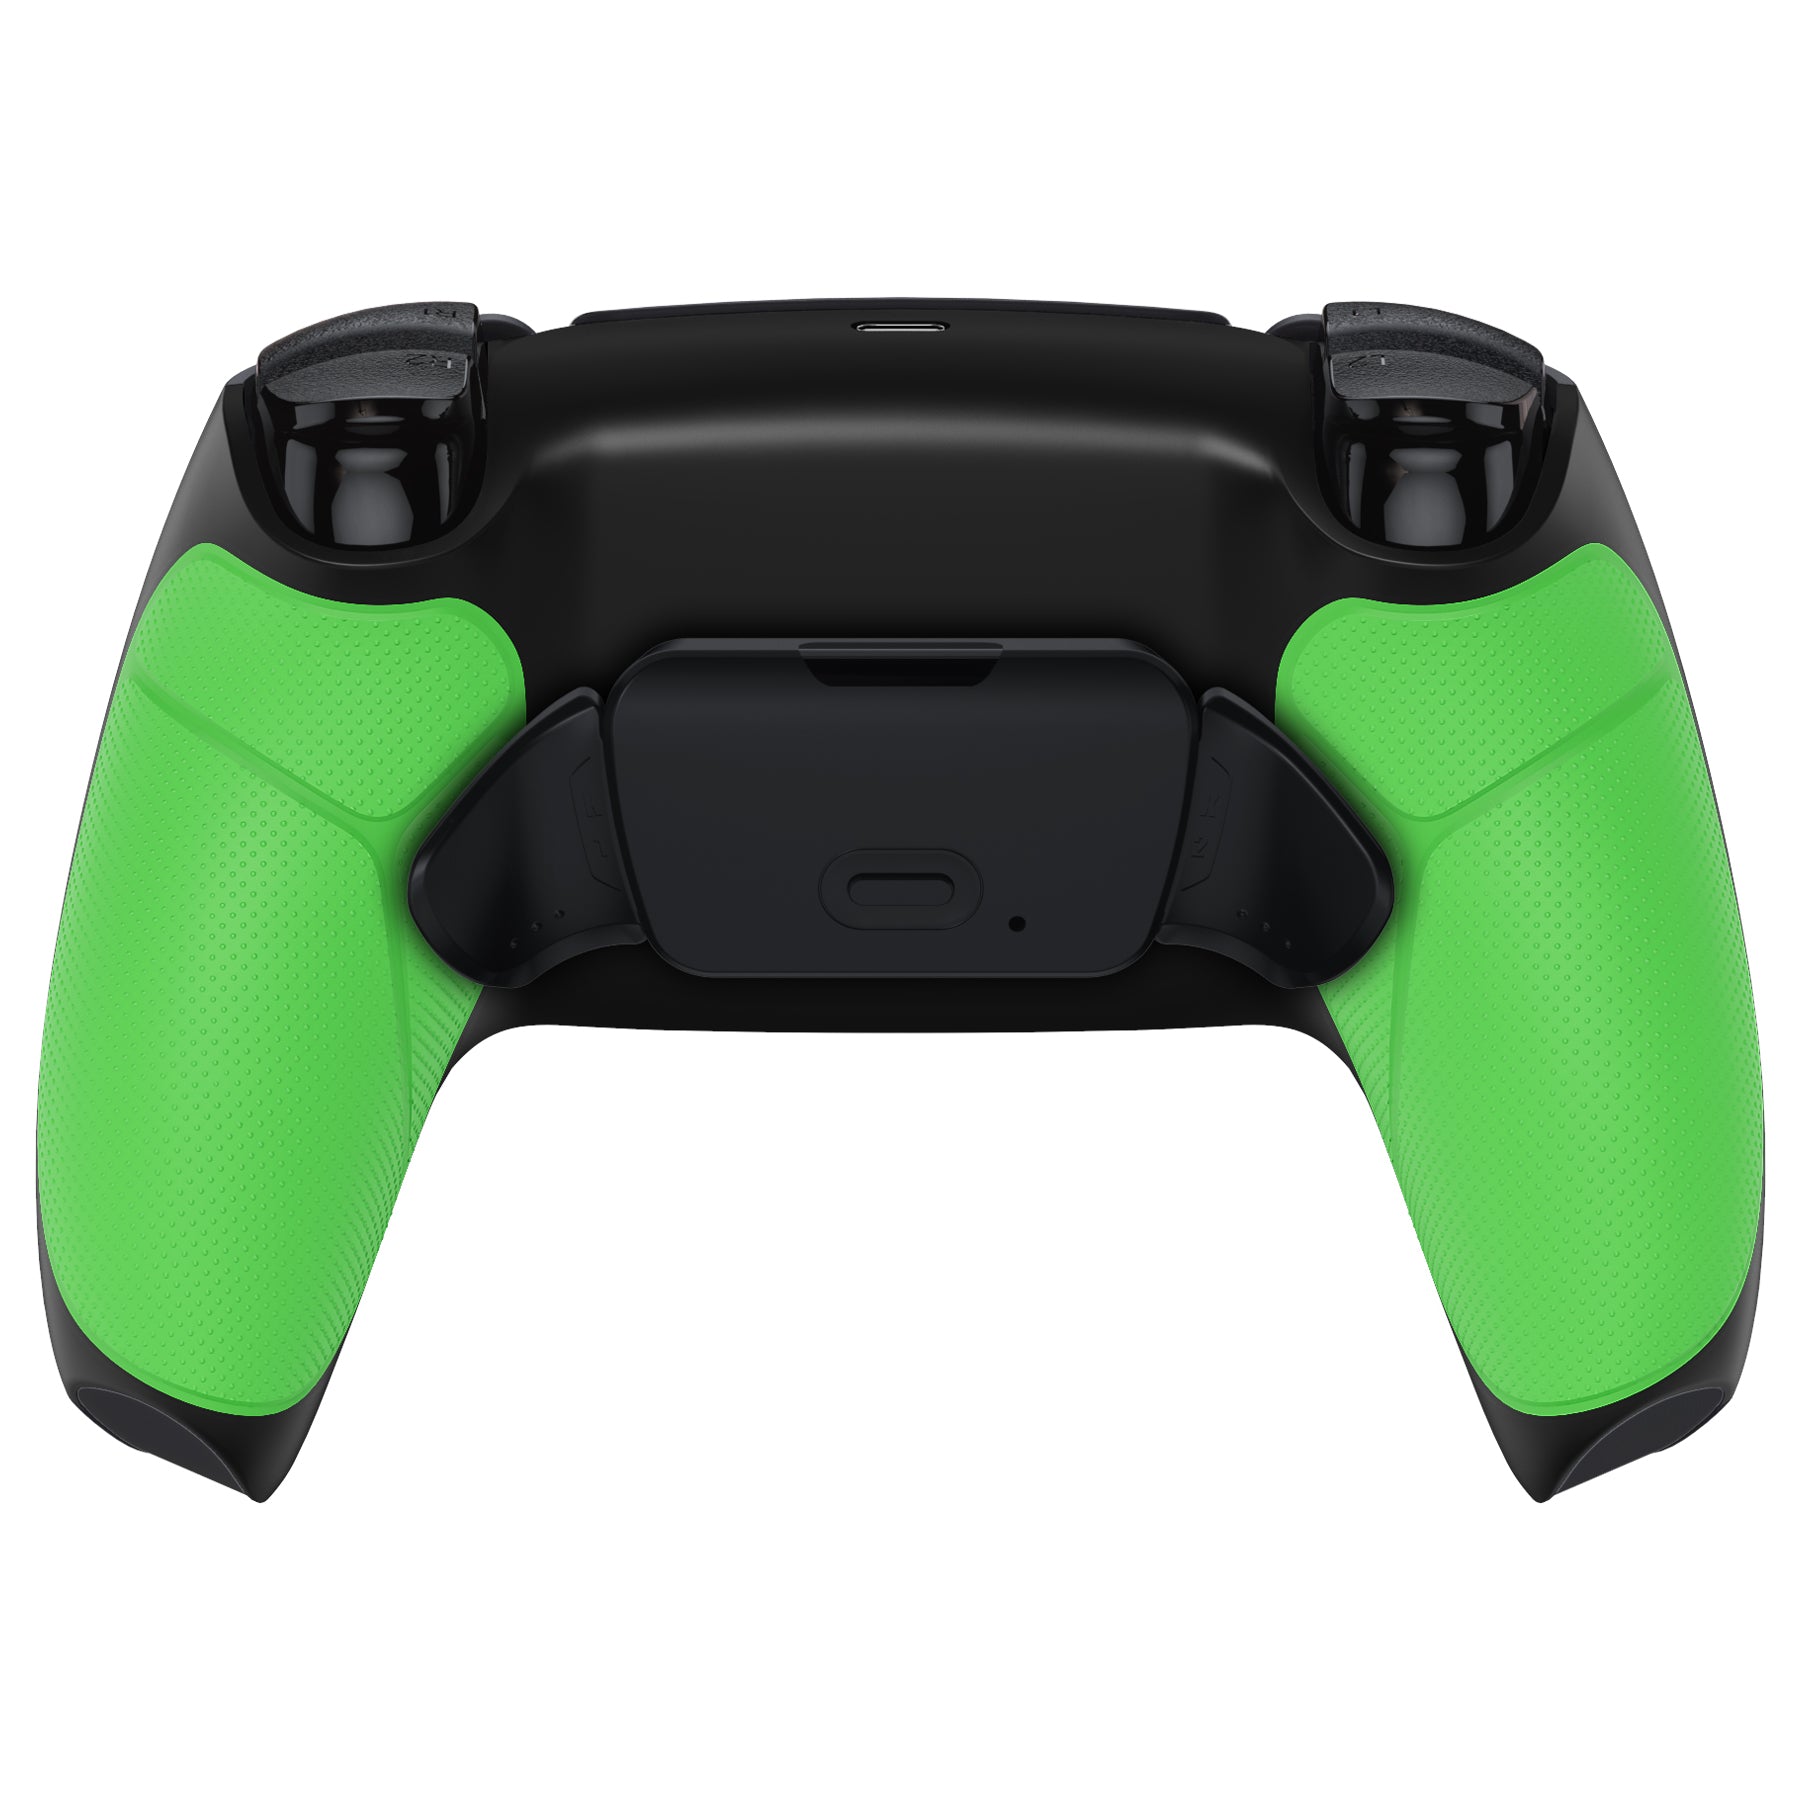 eXtremeRate Retail Green Rubberized Grip Back Paddles Remappable Rise Remap Kit with Upgrade Board & Redesigned Back Shell & Back Buttons Attachment for PS5 Controller BDM-010 & BDM-020 - XPFU6004